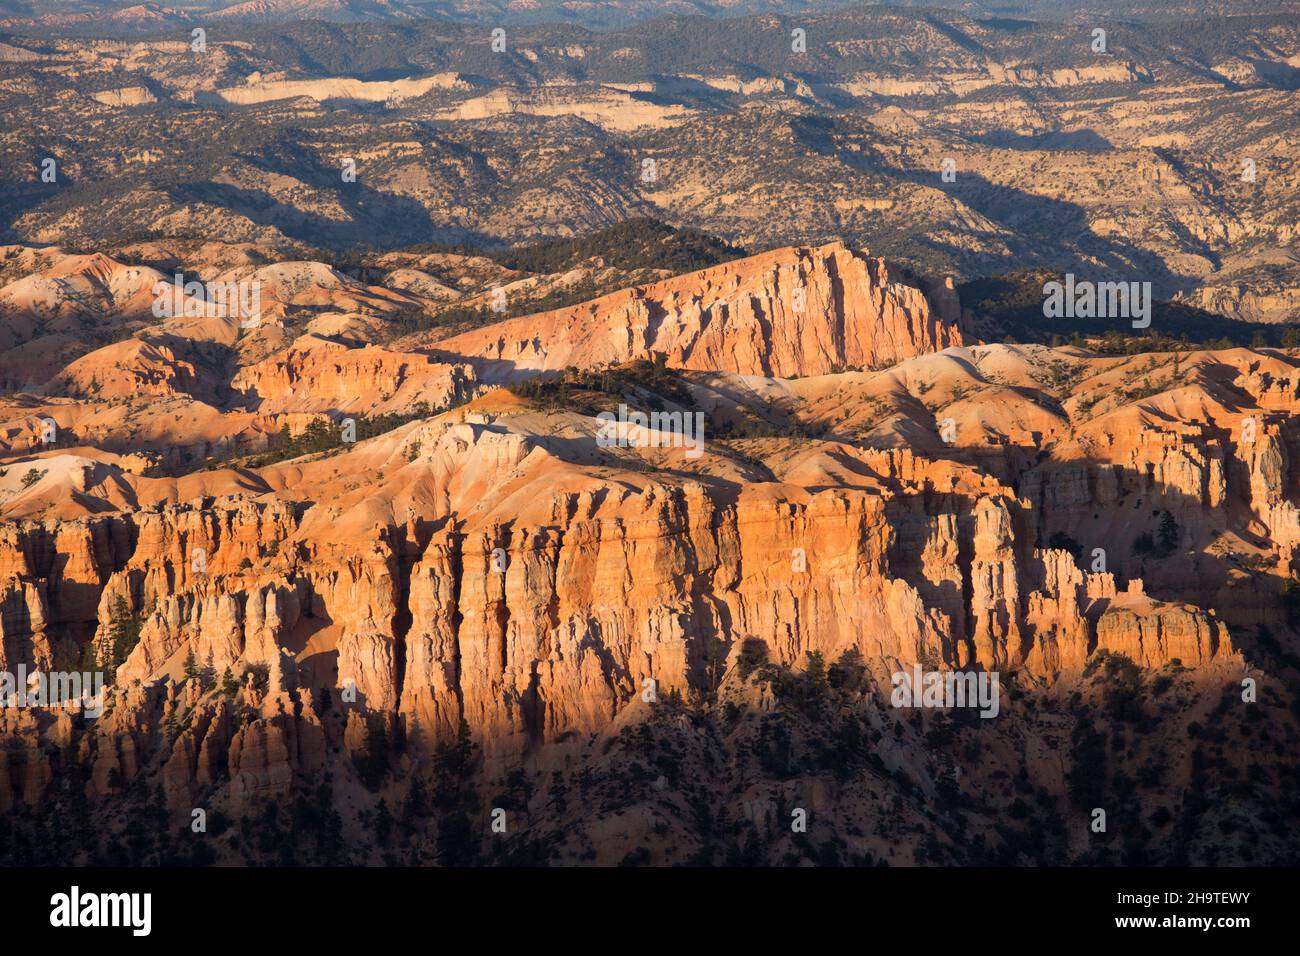 Bryce Canyon National Park, Utah, USA. View across Bryce Amphitheatre to Sinking Ship Mesa from the Rim Trail at Bryce Point, sunset. Stock Photo